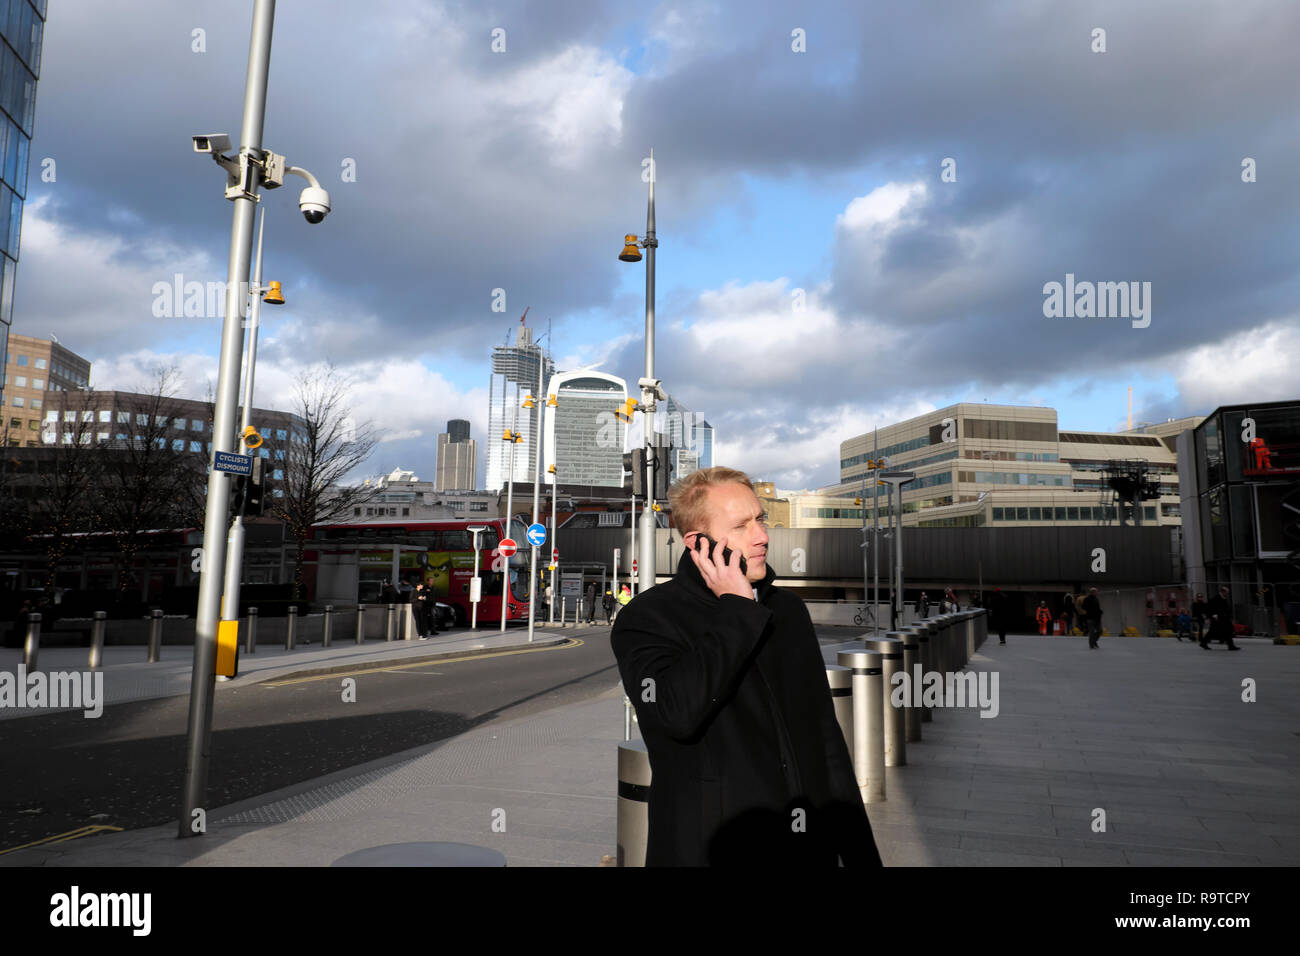 A man standing on the street near the Shard skyscraper talking on a mobile phone (cell phone) with a view of the City of London UK KATHY DEWITT Stock Photo